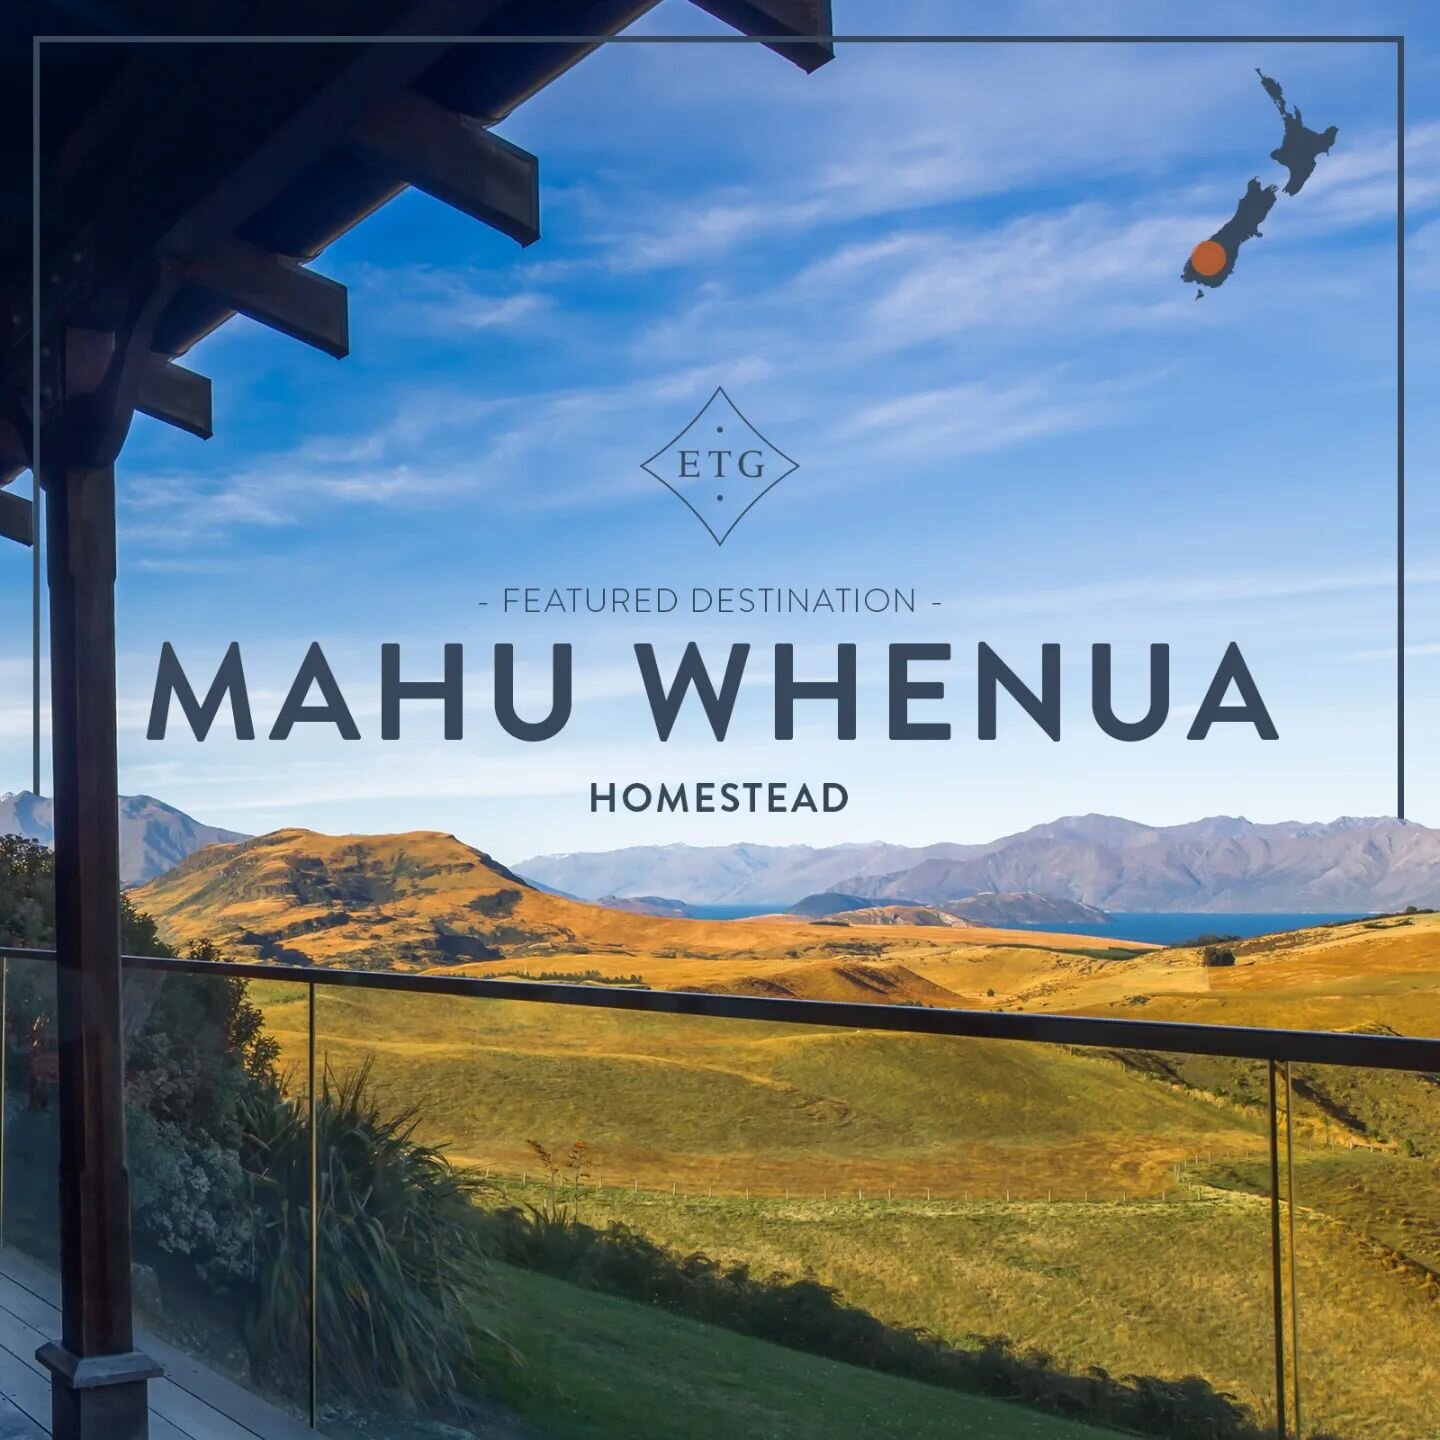 The stunning Mahu Whenua is exactly what luxury and comfort should be. Inviting, personal and a totally unique experience. 

With views over lake Wanaka and the surrounding mountains, this majestic high-country location is perched in 136,000 acres of